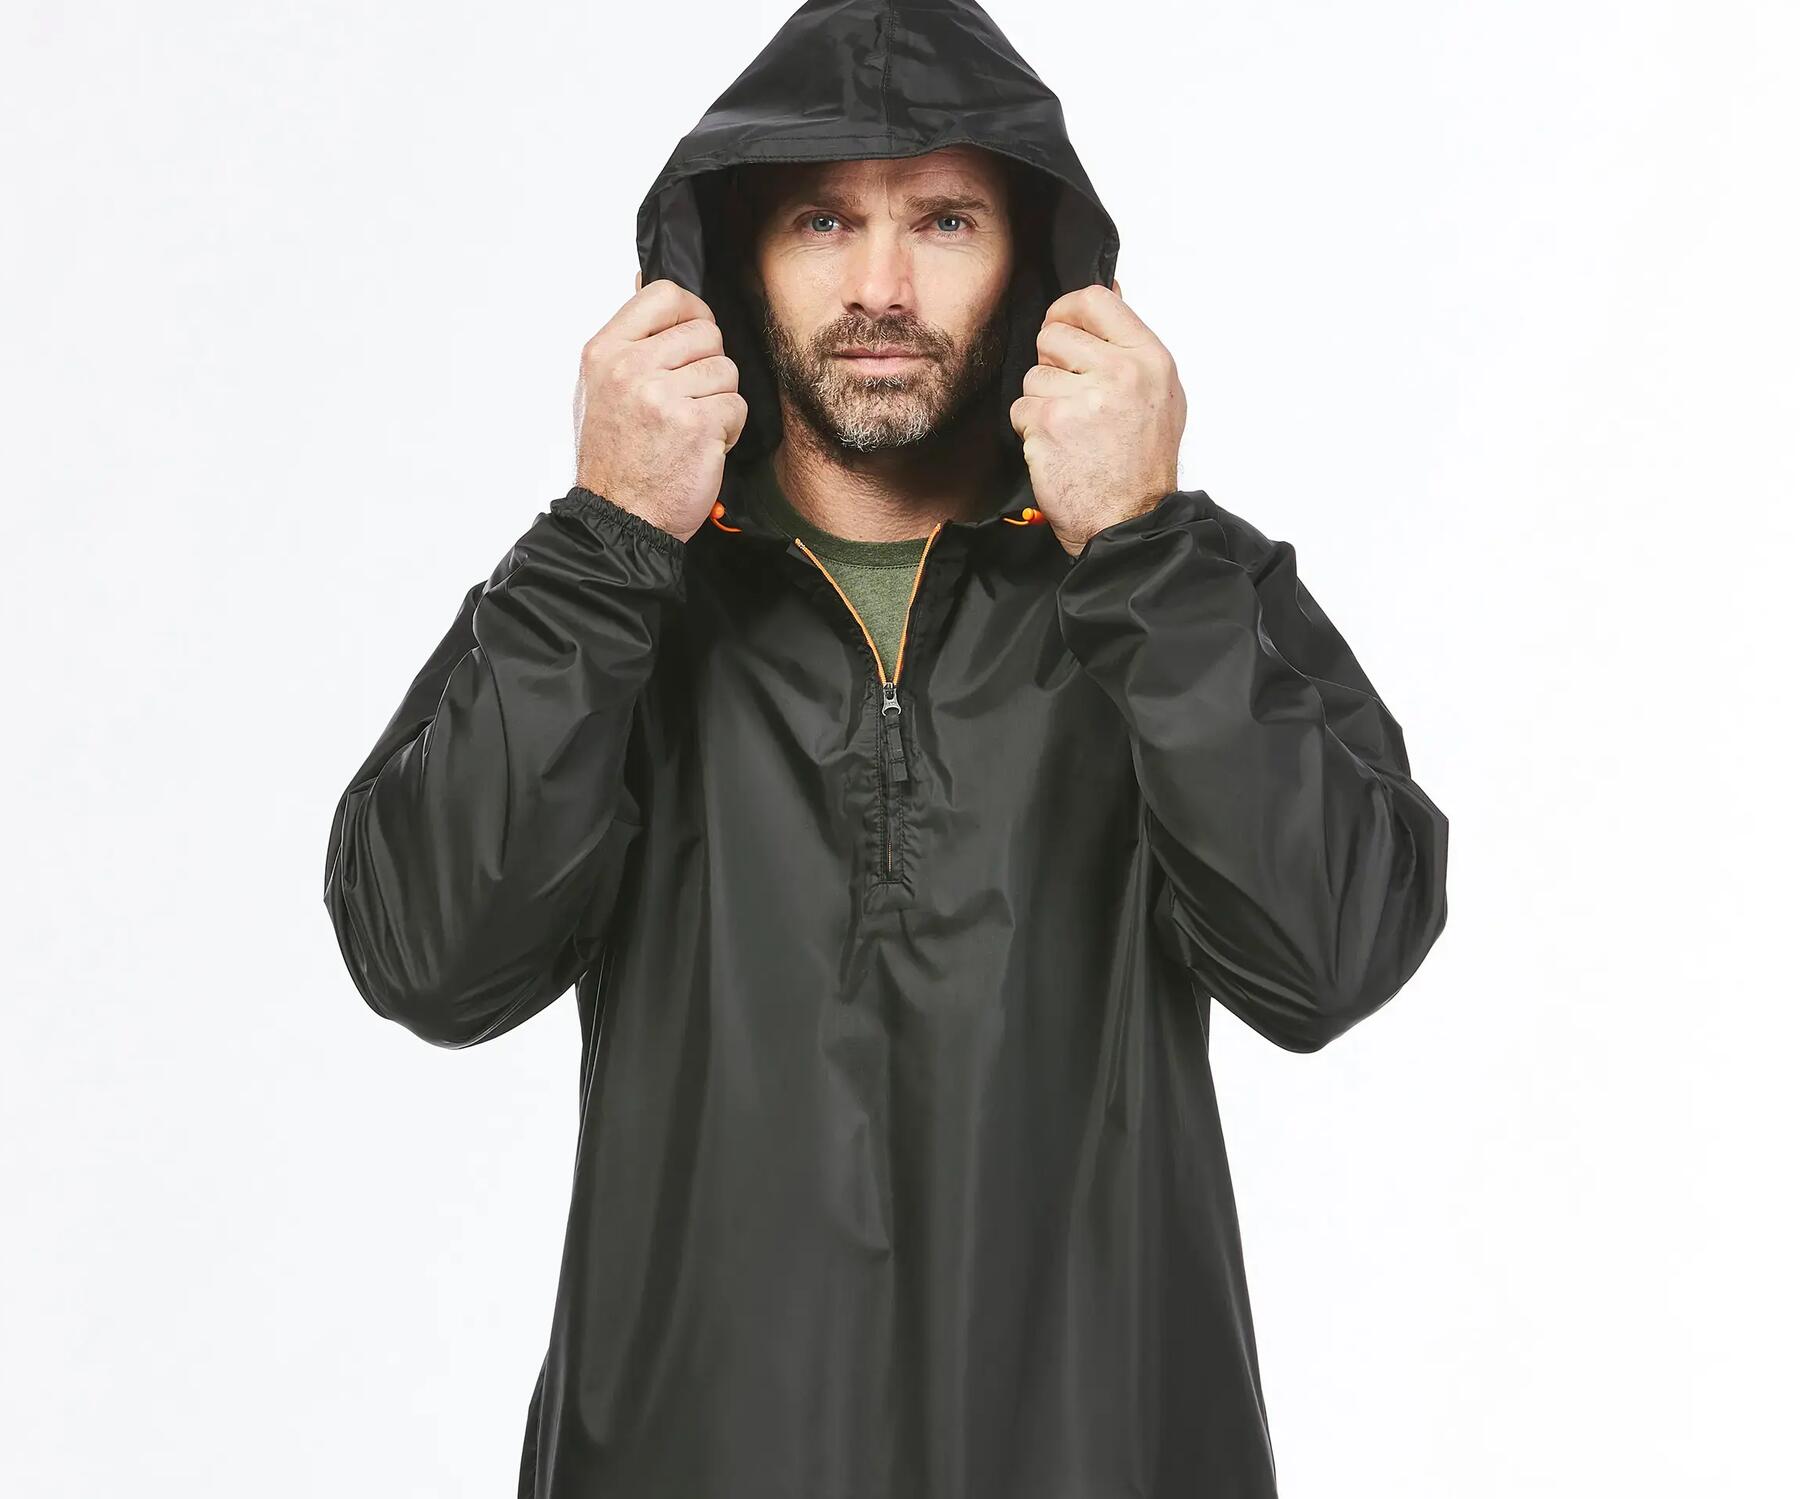 Our Top 10 Lightest Waterproof Jackets for 2023